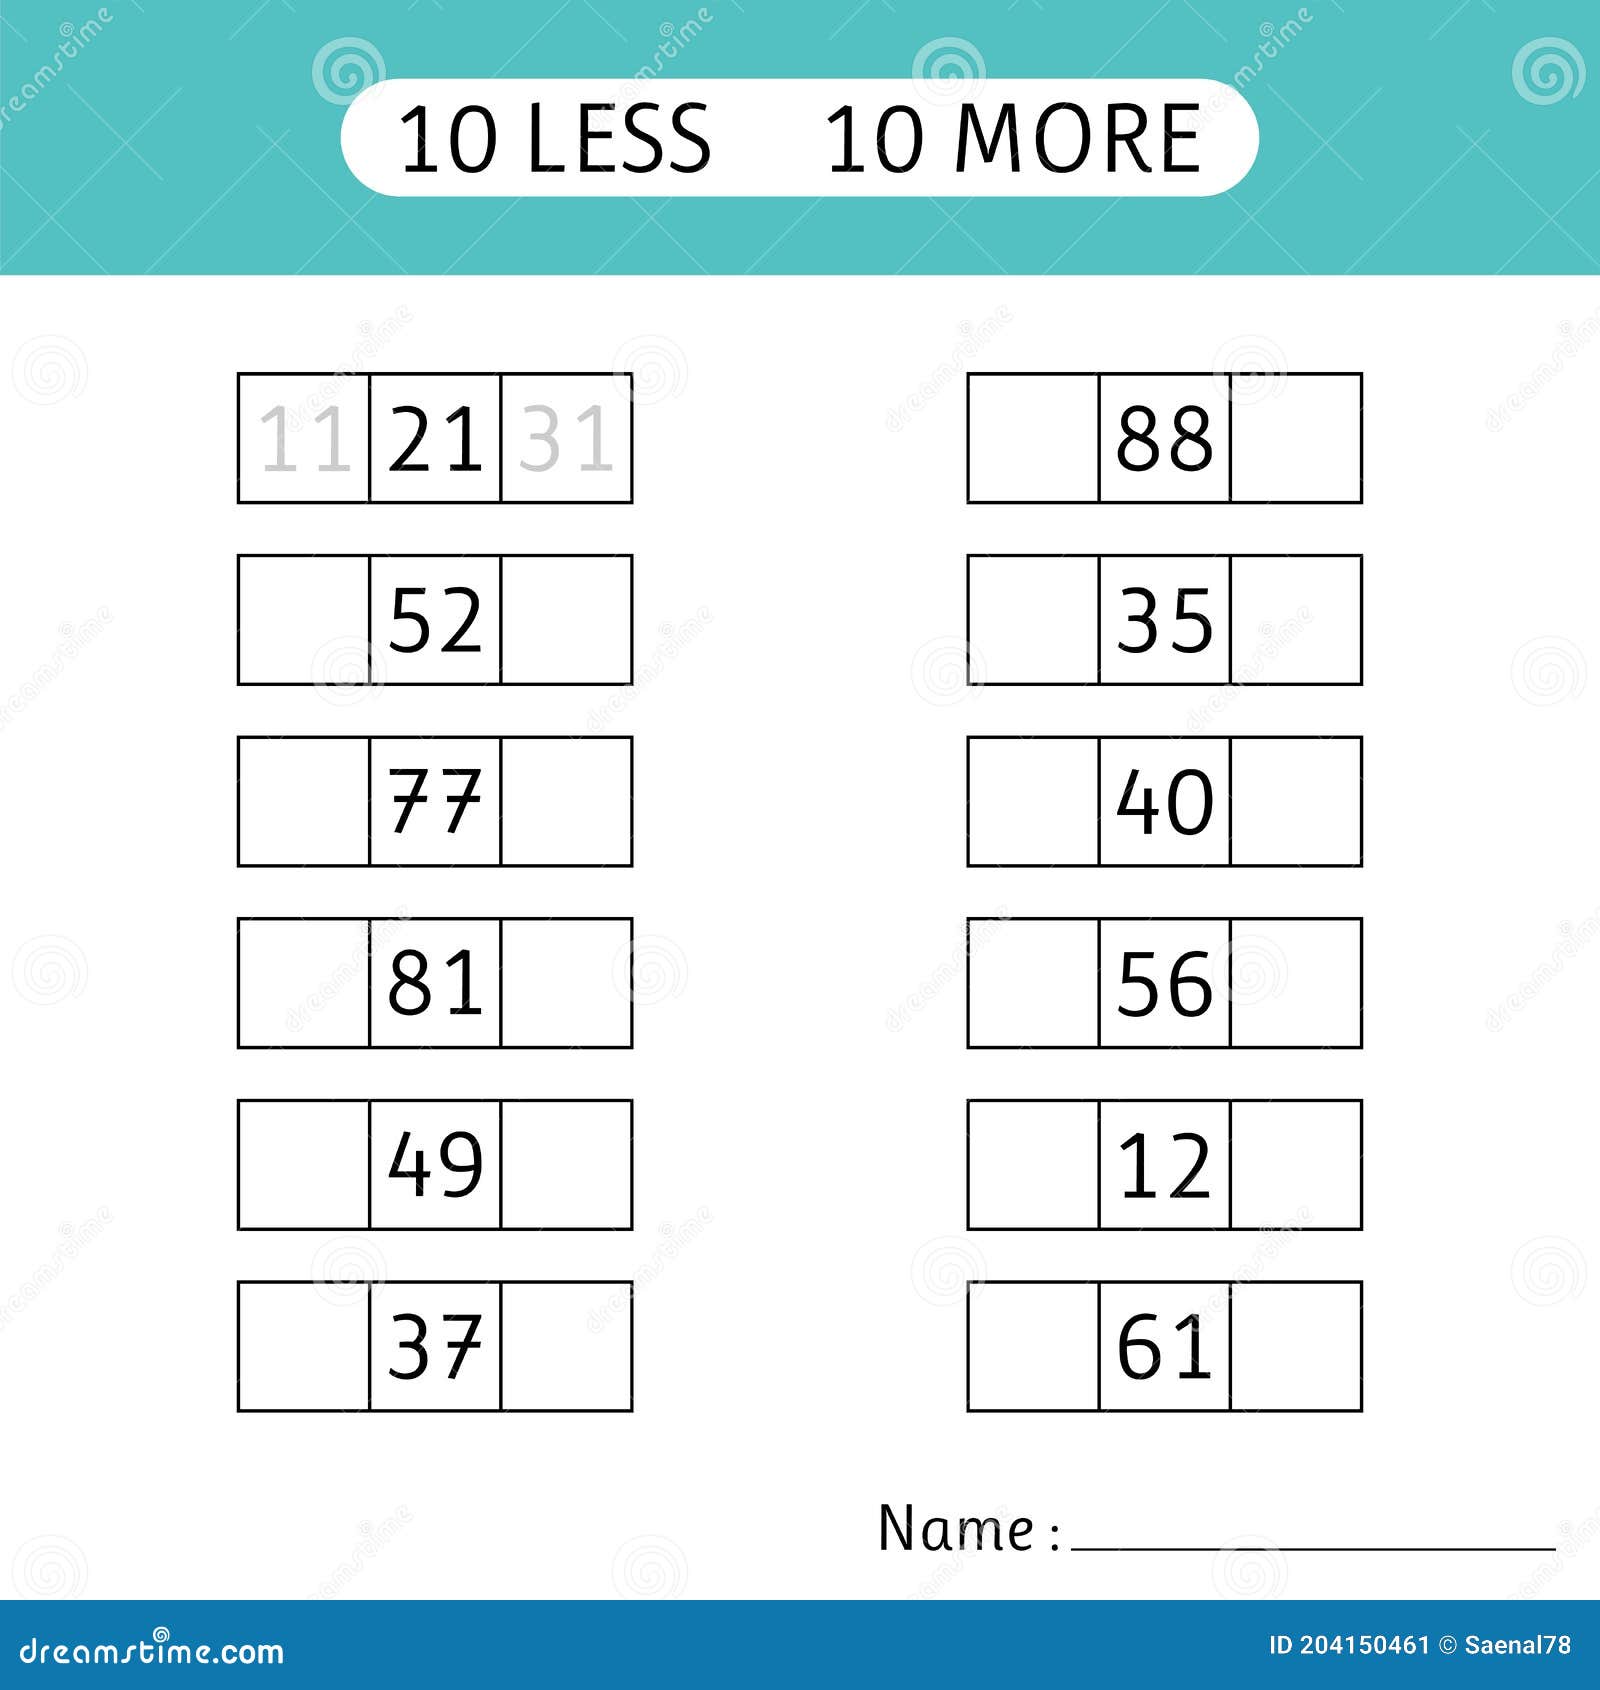 22 less, 22 More. Fill in the Missing Numbers. Worksheets for Kids Intended For Ten More Ten Less Worksheet